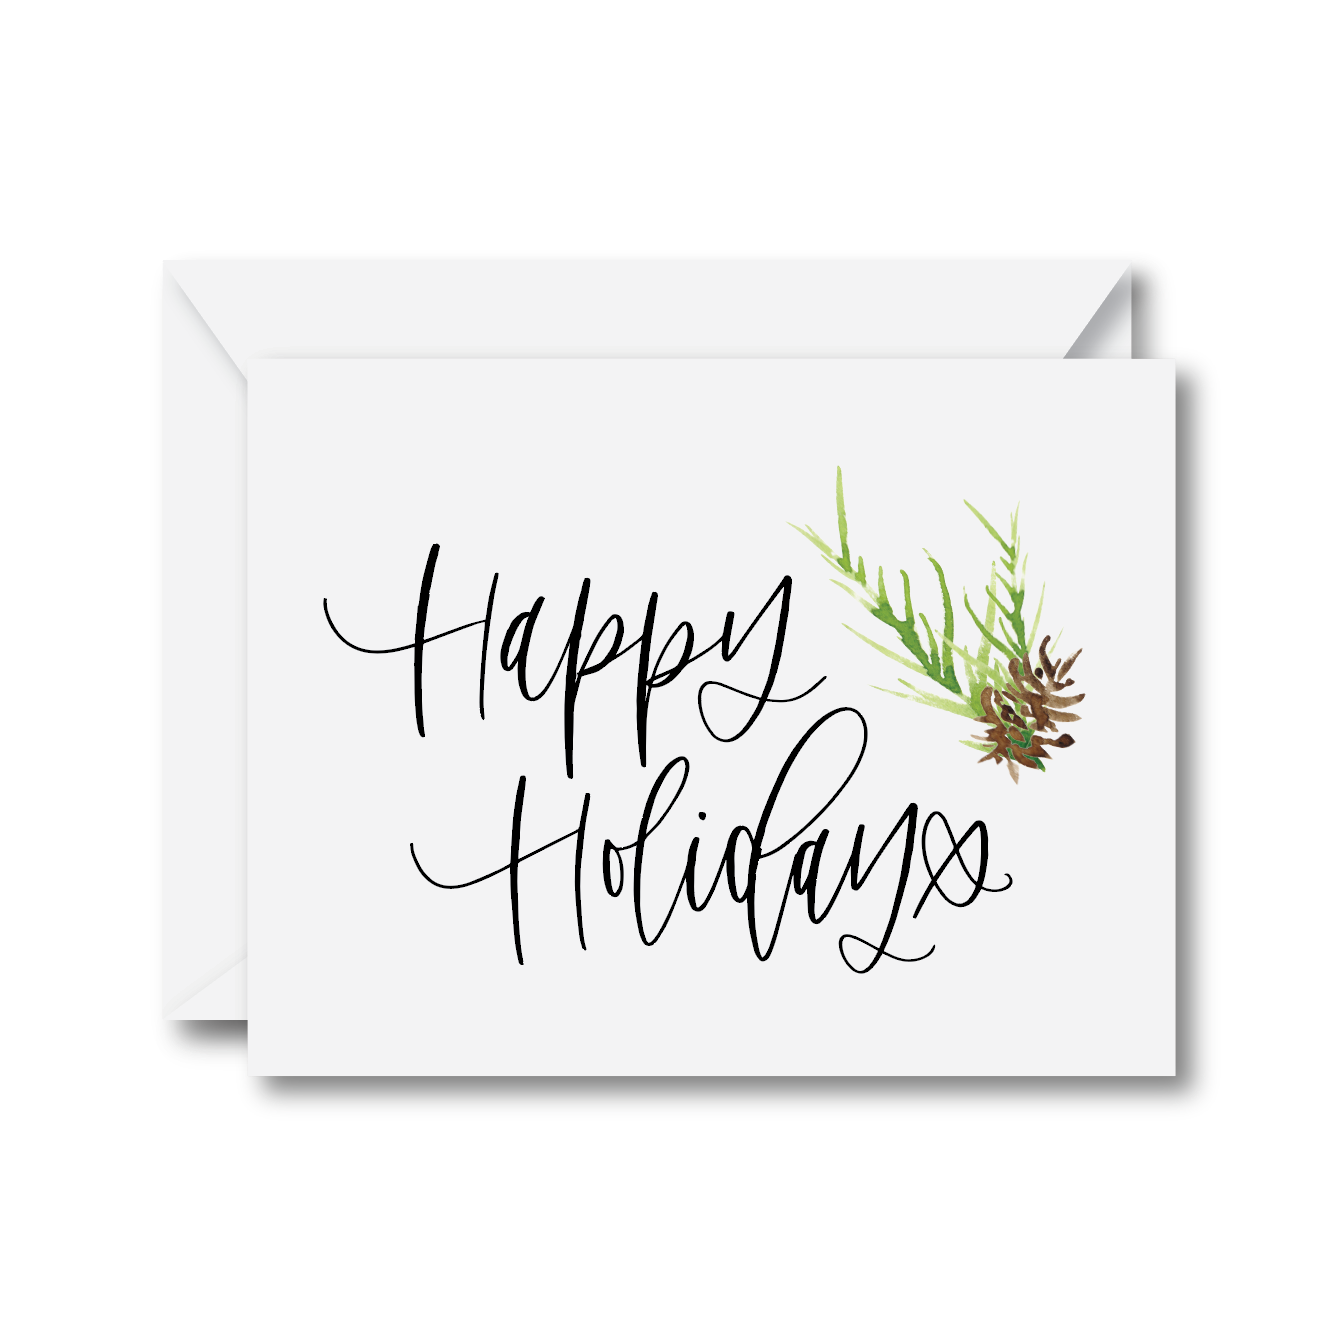 Happy Holidays Pine Bough Card